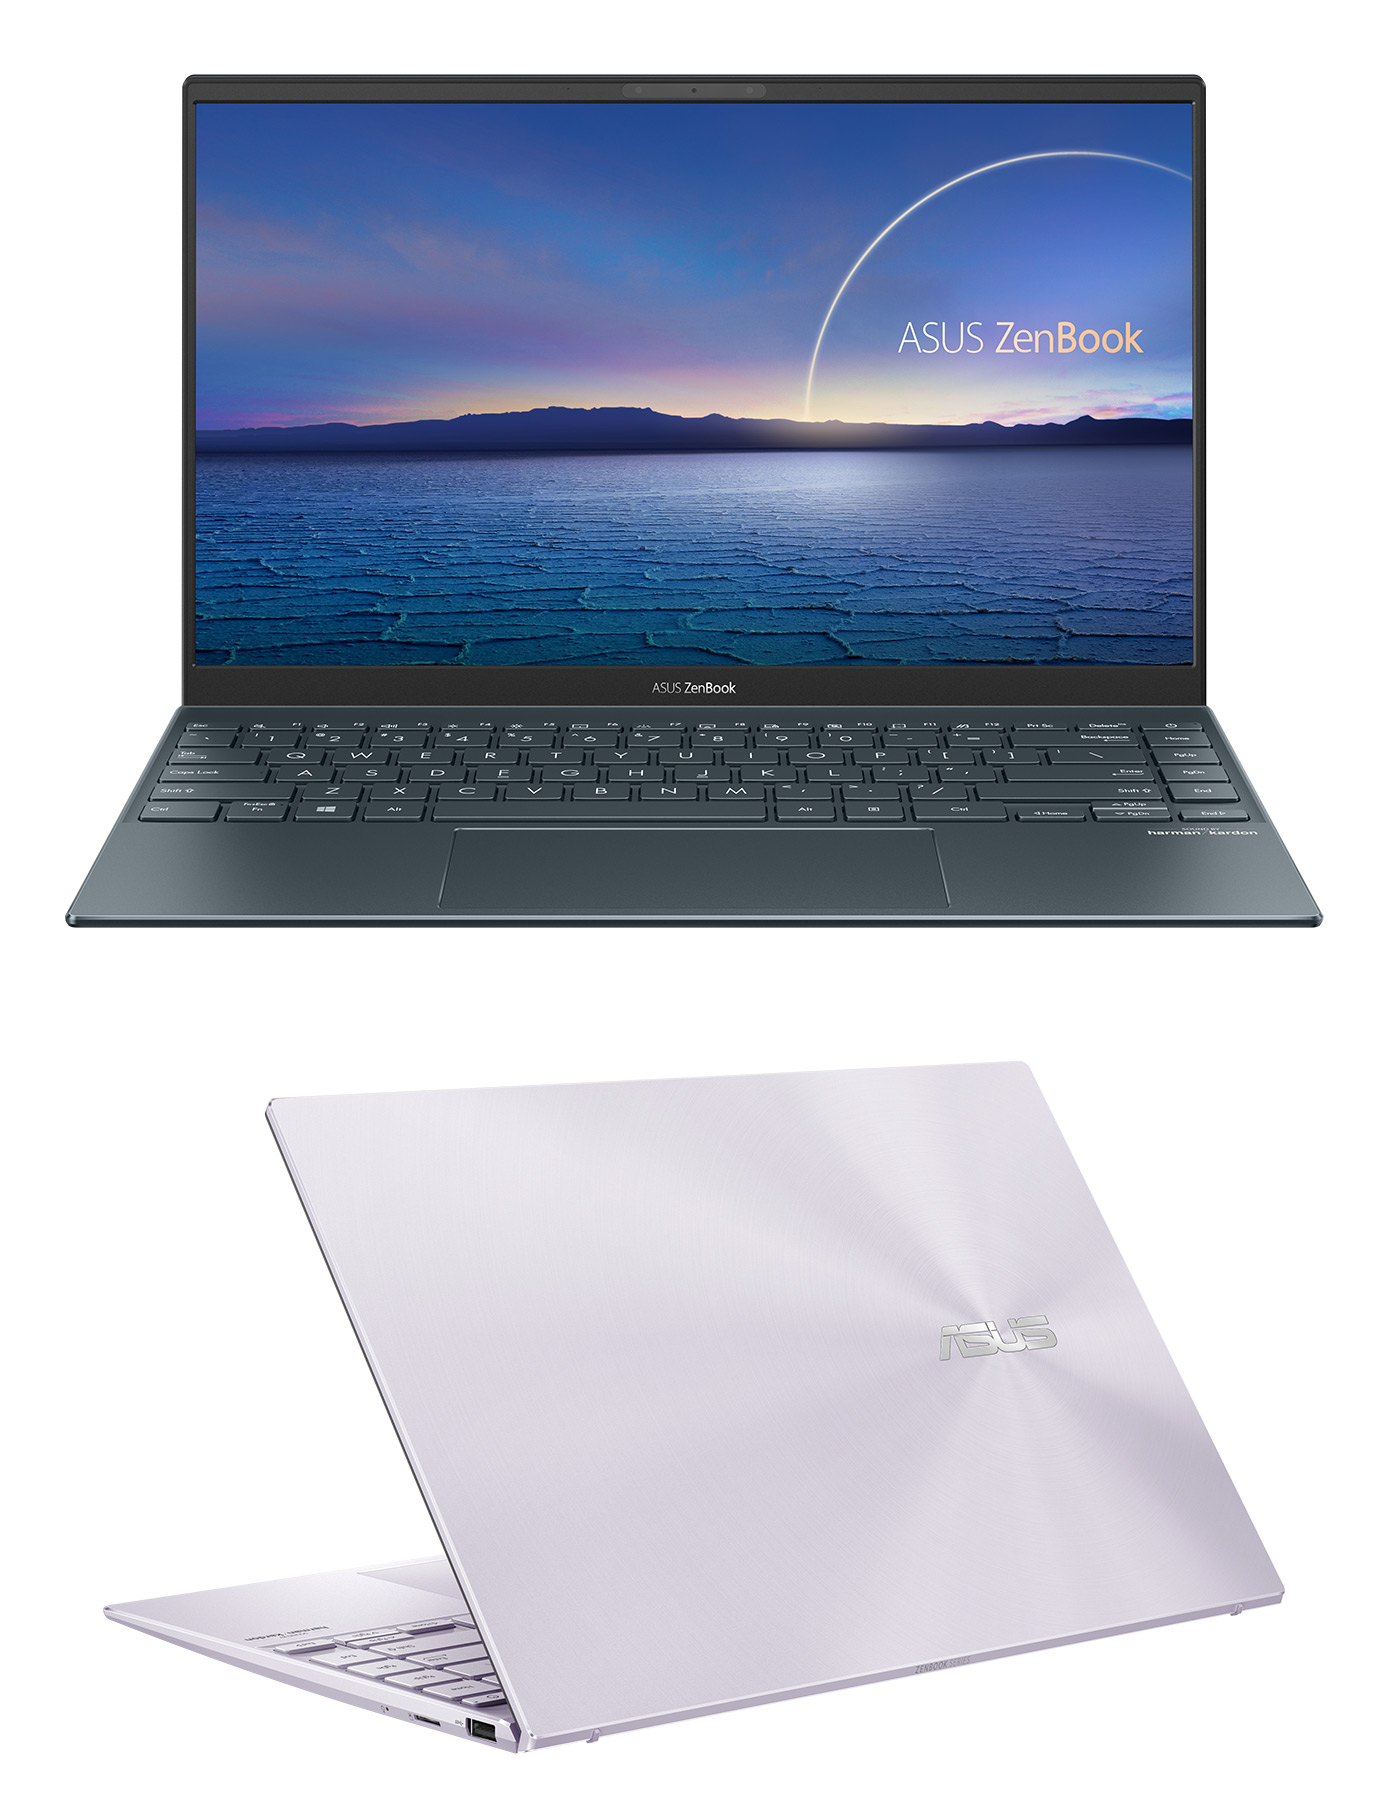 Top 7 Advantages of ASUS ZenBook 13 | 14 Laptops Over Other Laptops